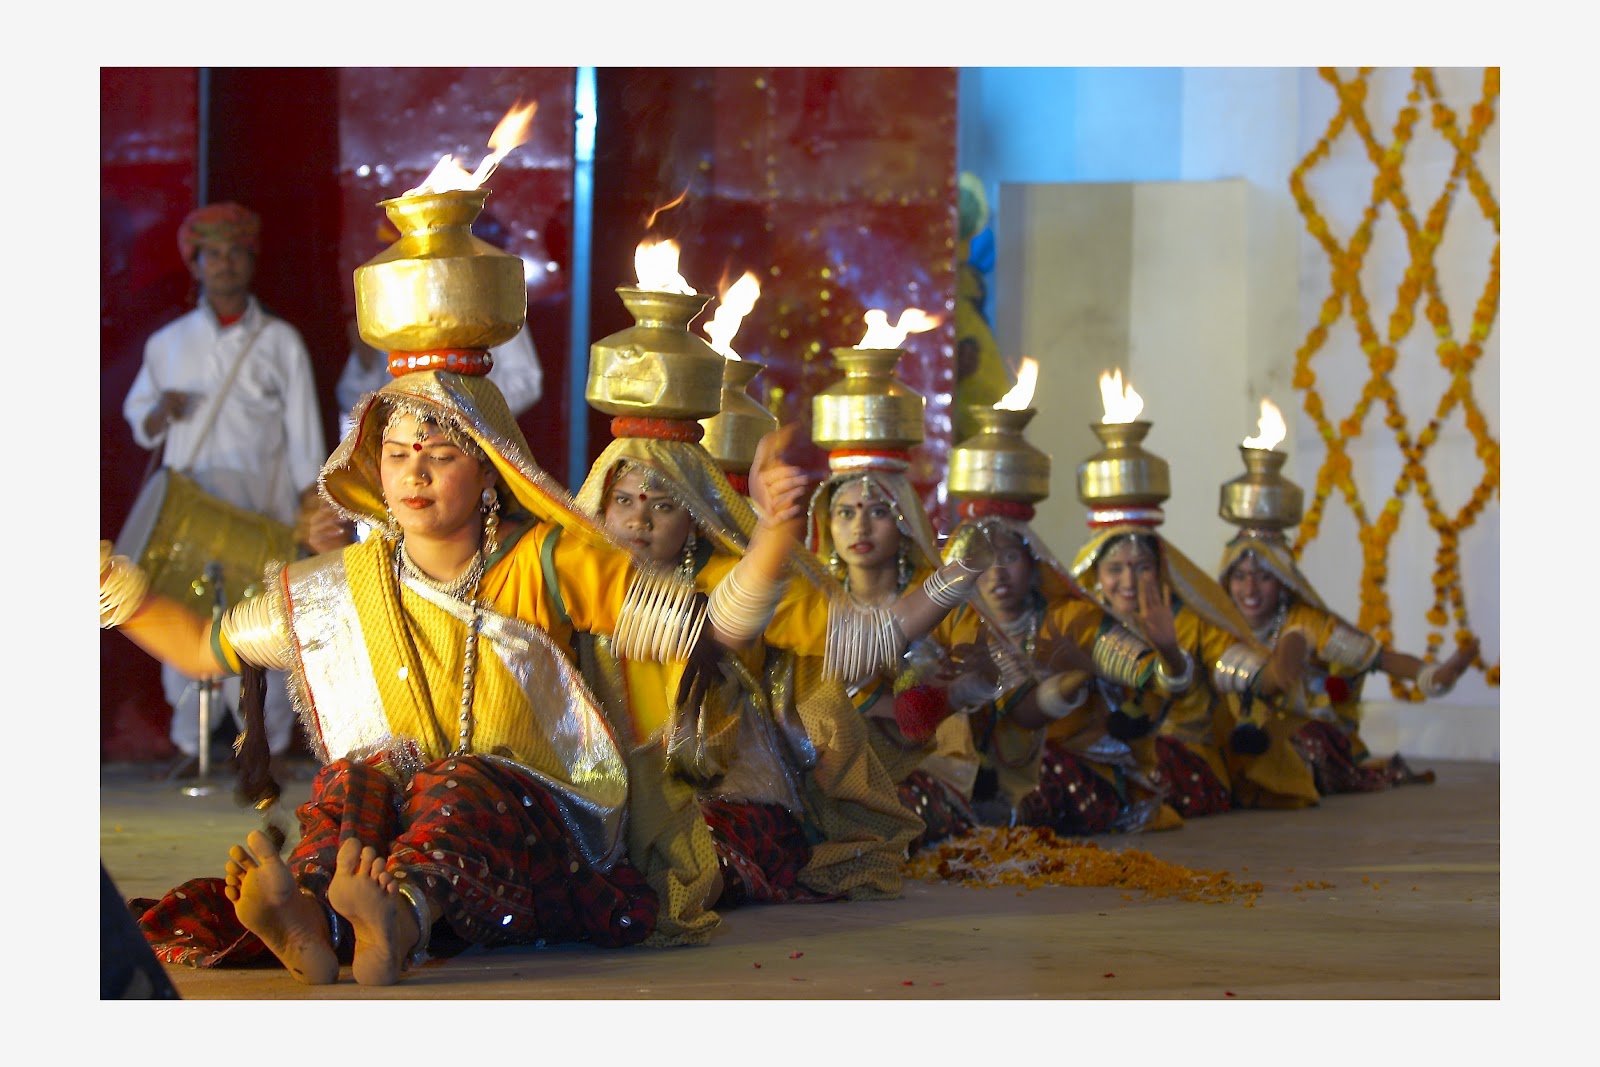 dances of rajasthan, rajasthan tour packages